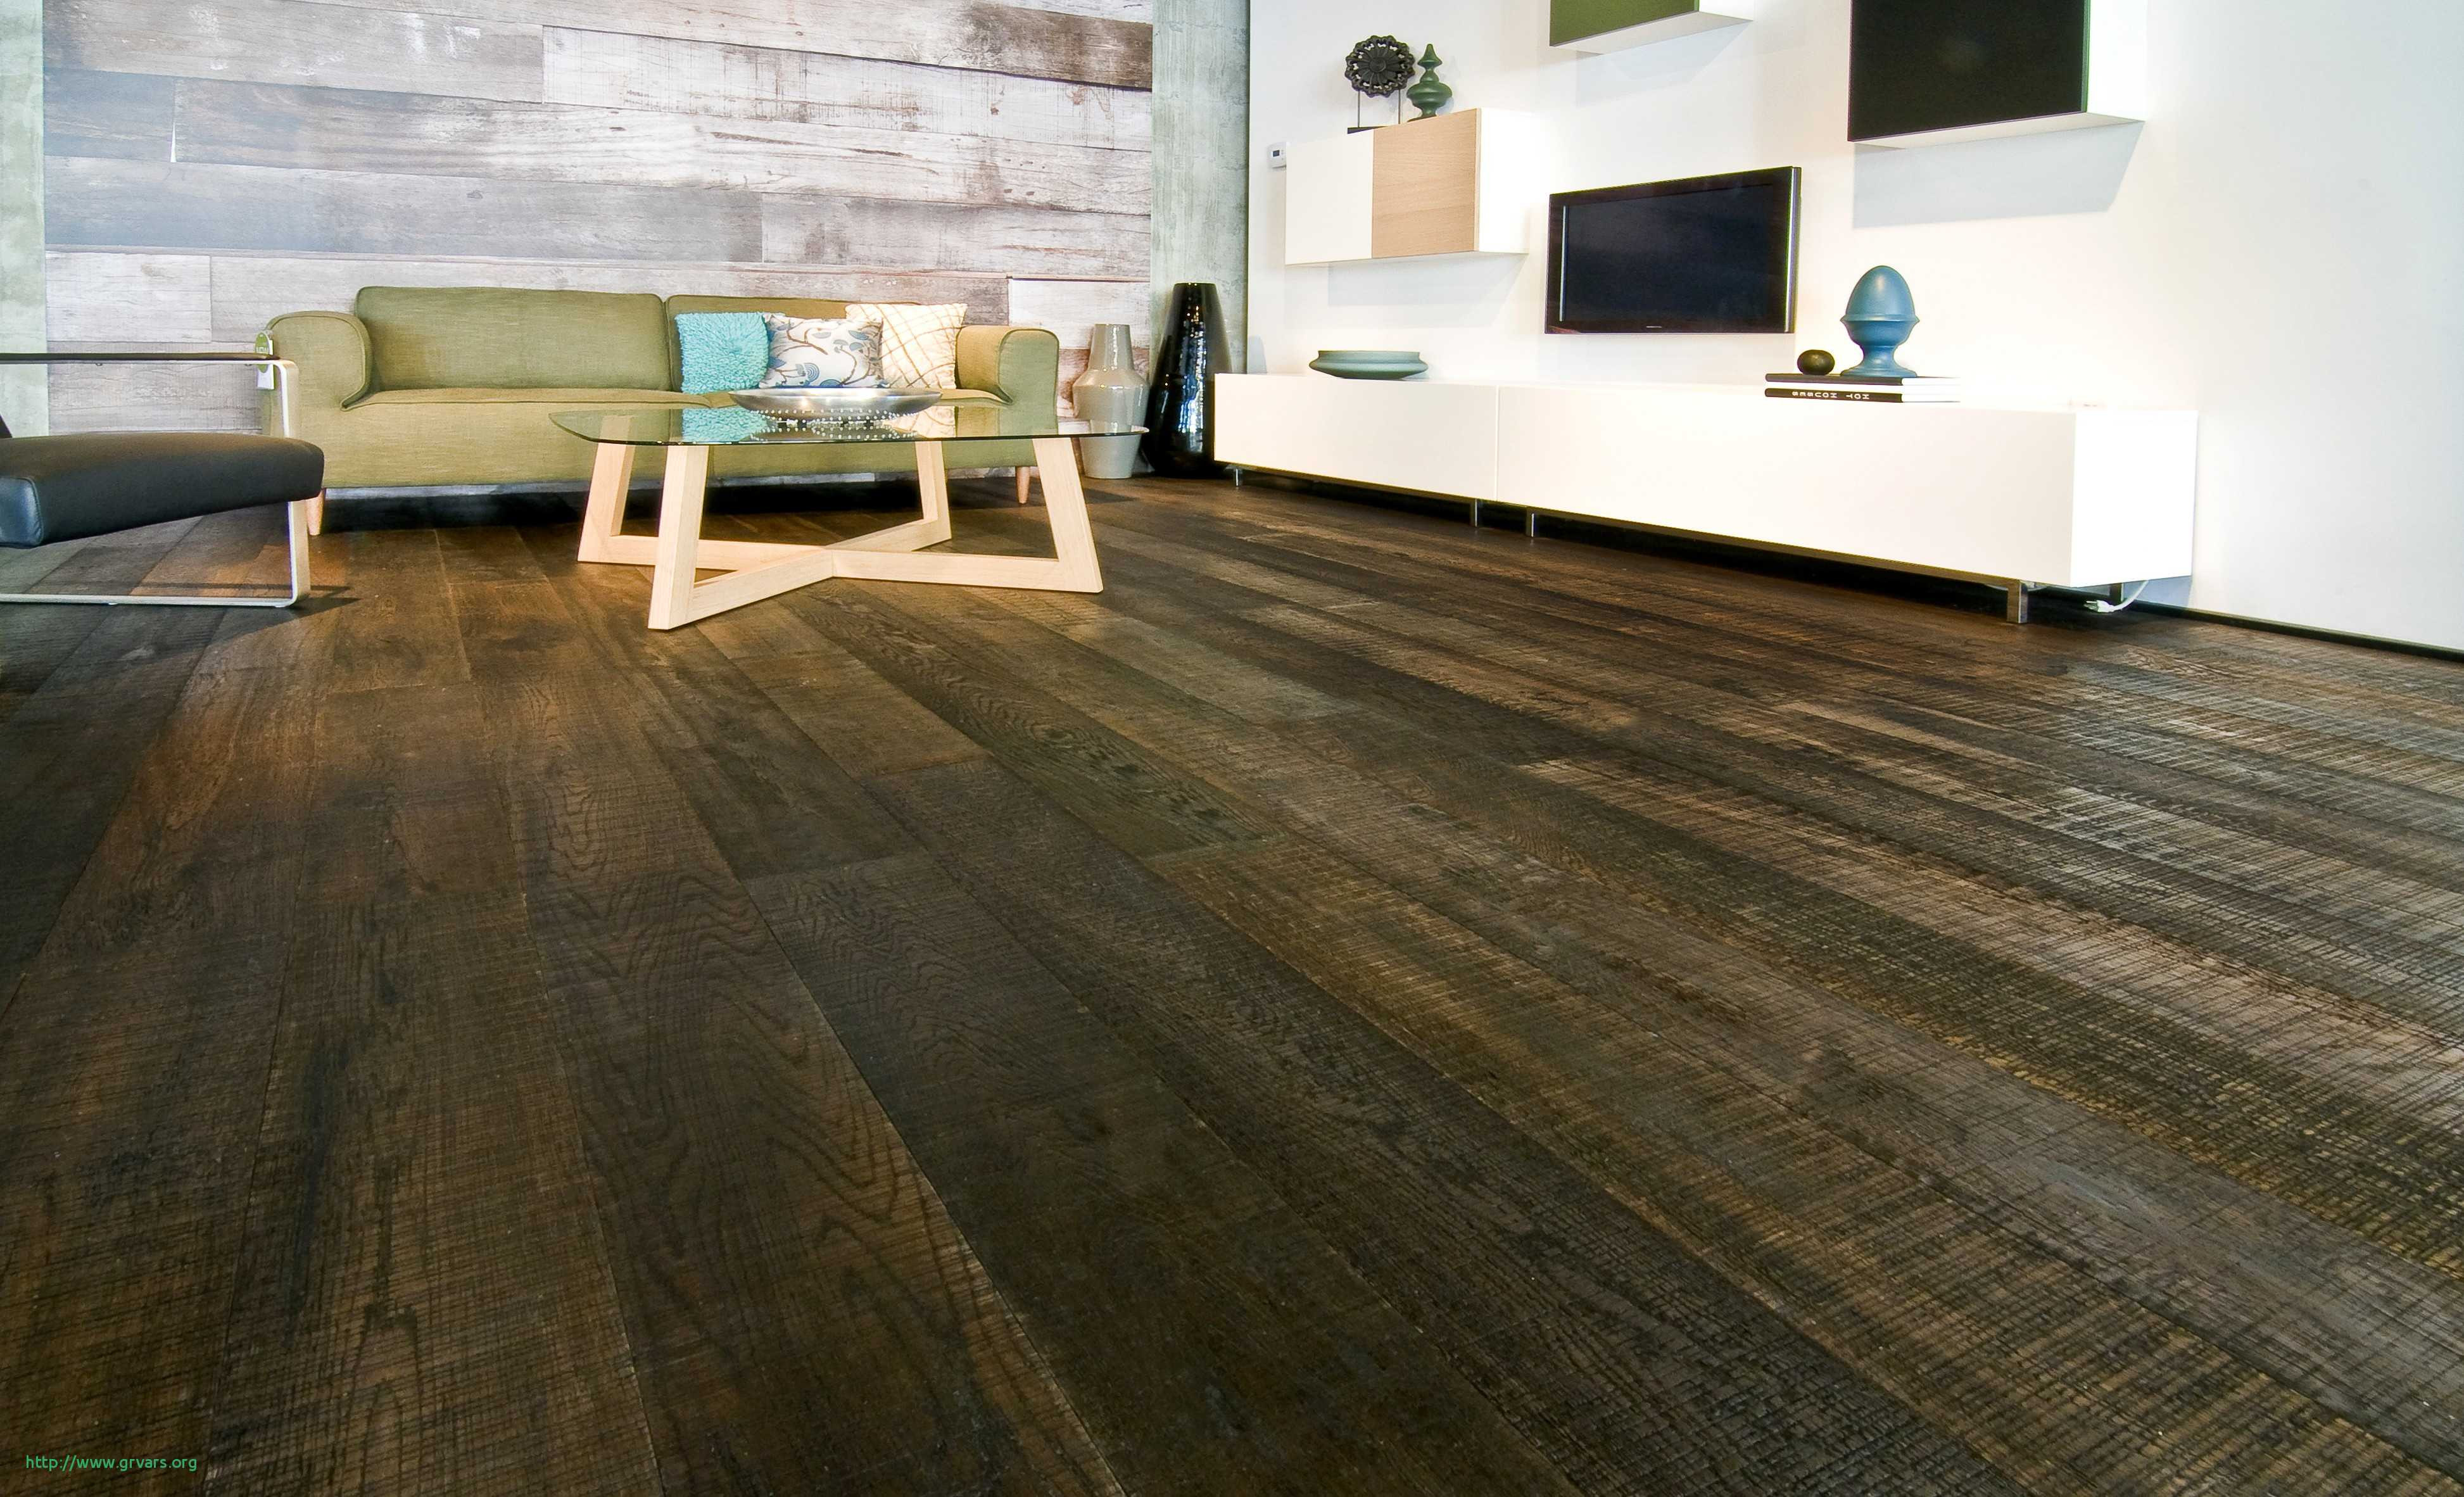 mohawk hardwood flooring prices of factory direct flooring san diego luxe engaging discount hardwood throughout factory direct flooring san diego luxe engaging discount hardwood flooring 5 where to buy inspirational 0d